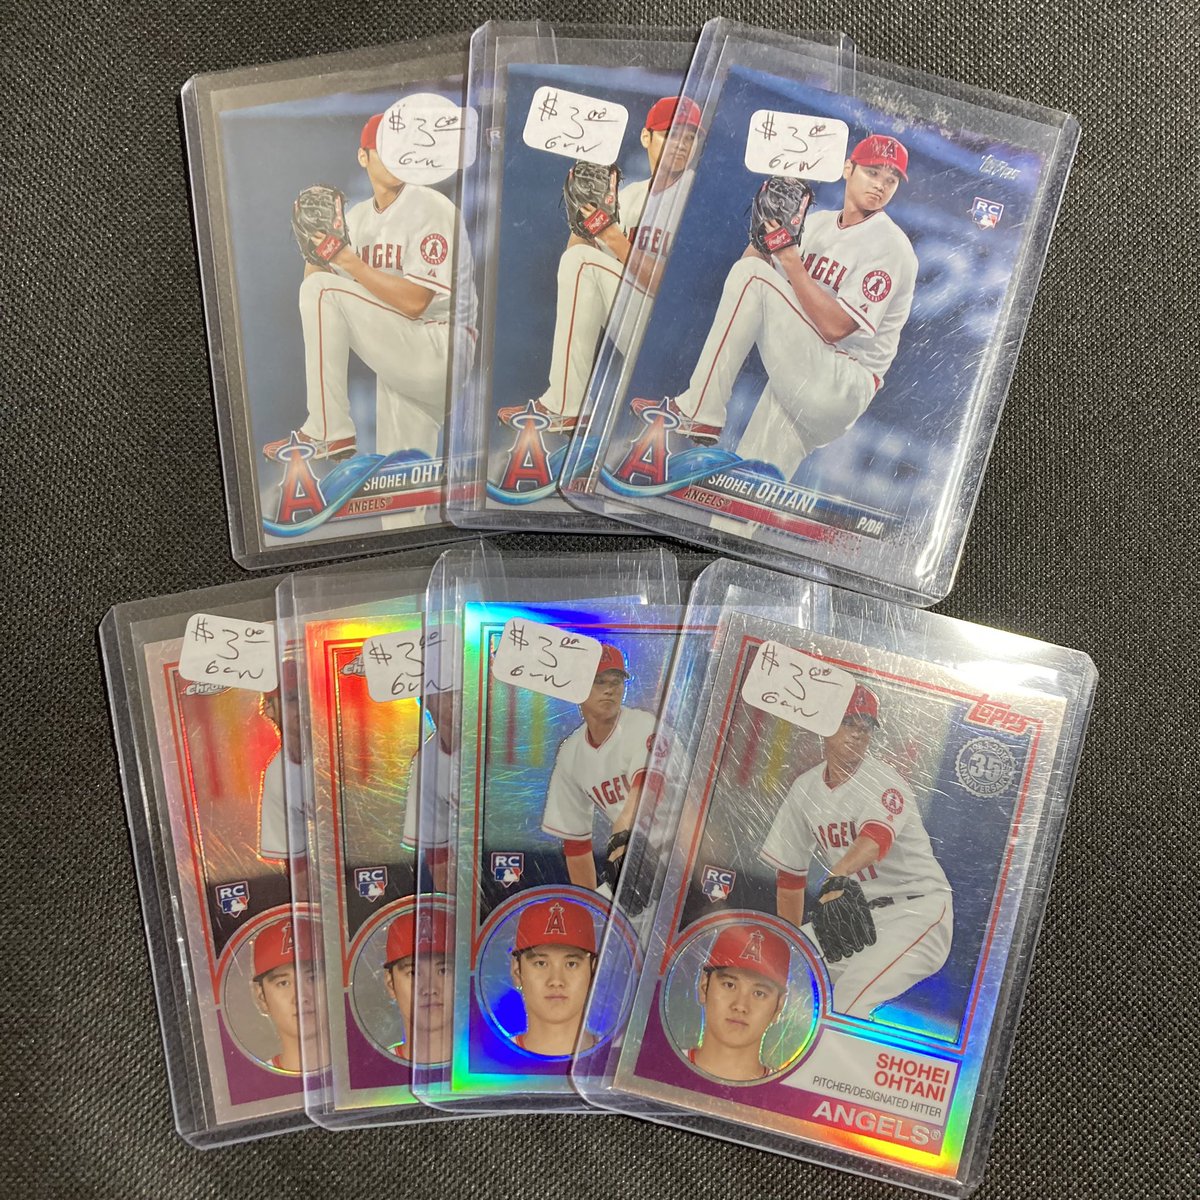 Shohei Ohtani Rookies So glad I held on to these!!! Going through old Bargain bin box collections I bought from back in 2019. #whodoyoucollect #thehobby #baseball #baseballcards #ohtani #shoheiohtani #shoheiohtanicards #angels #angelsbaseball